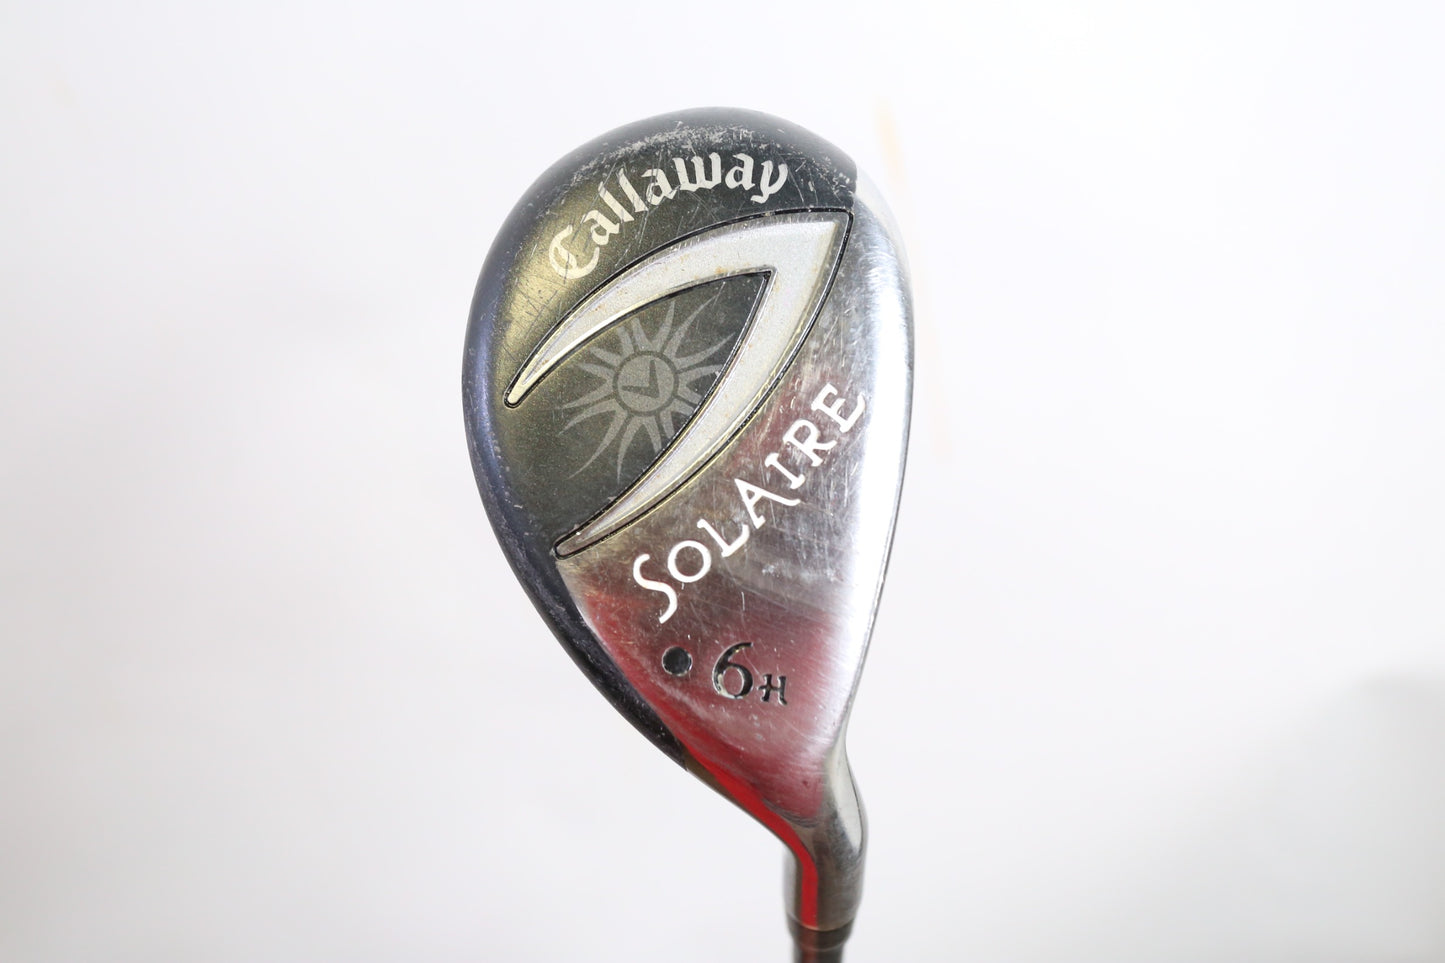 Used Callaway Solaire 6H Hybrid - Right-Handed - 32 Degrees - Ladies Flex-Next Round